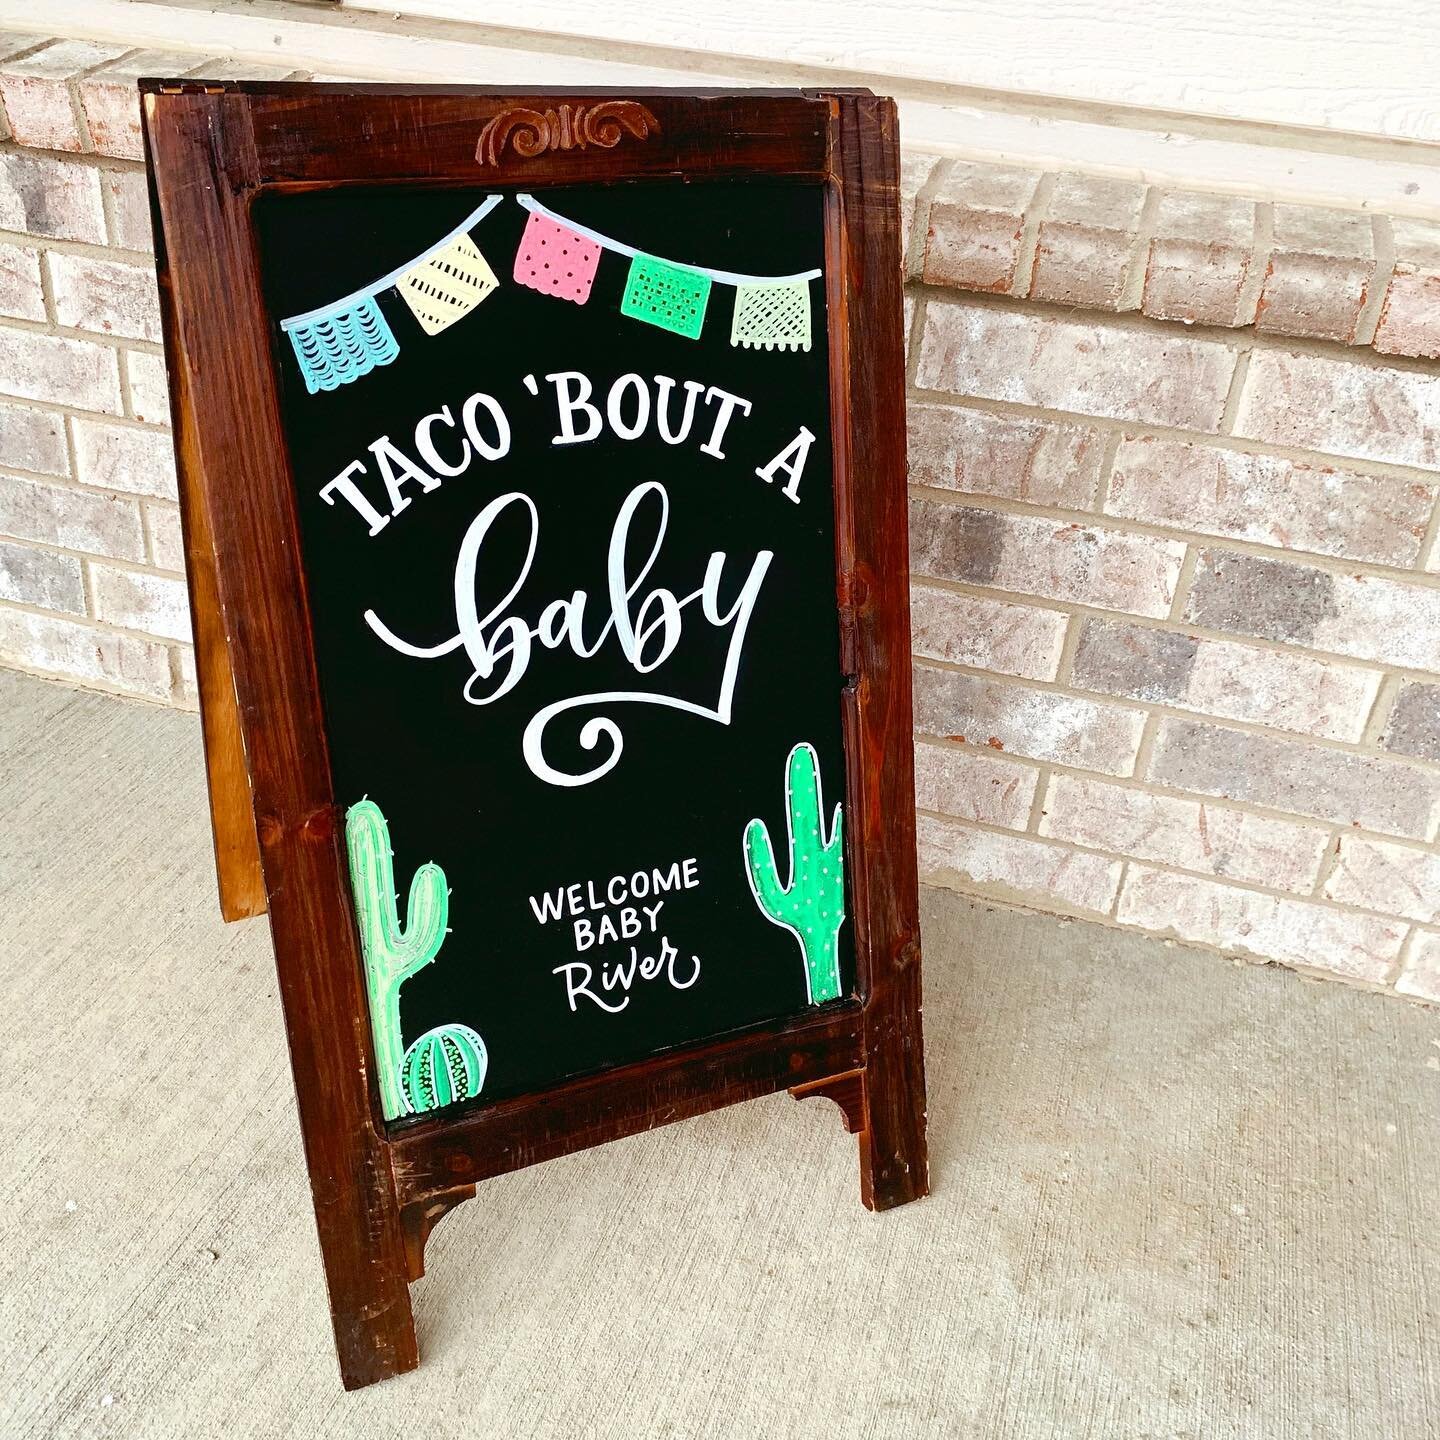 🌮 Taco &lsquo;Bout A Baby! 🌮
⠀⠀⠀⠀⠀⠀⠀⠀⠀
Spiced up this chalkboard easel for a sweet client hosting a themed baby shower this weekend! 🌵🏜
⠀⠀⠀⠀⠀⠀⠀⠀⠀
Check out the Reels tab for a process vid! 😍
⠀⠀⠀⠀⠀⠀⠀⠀⠀
#babyshower #babyshowerideas #babyshowersign